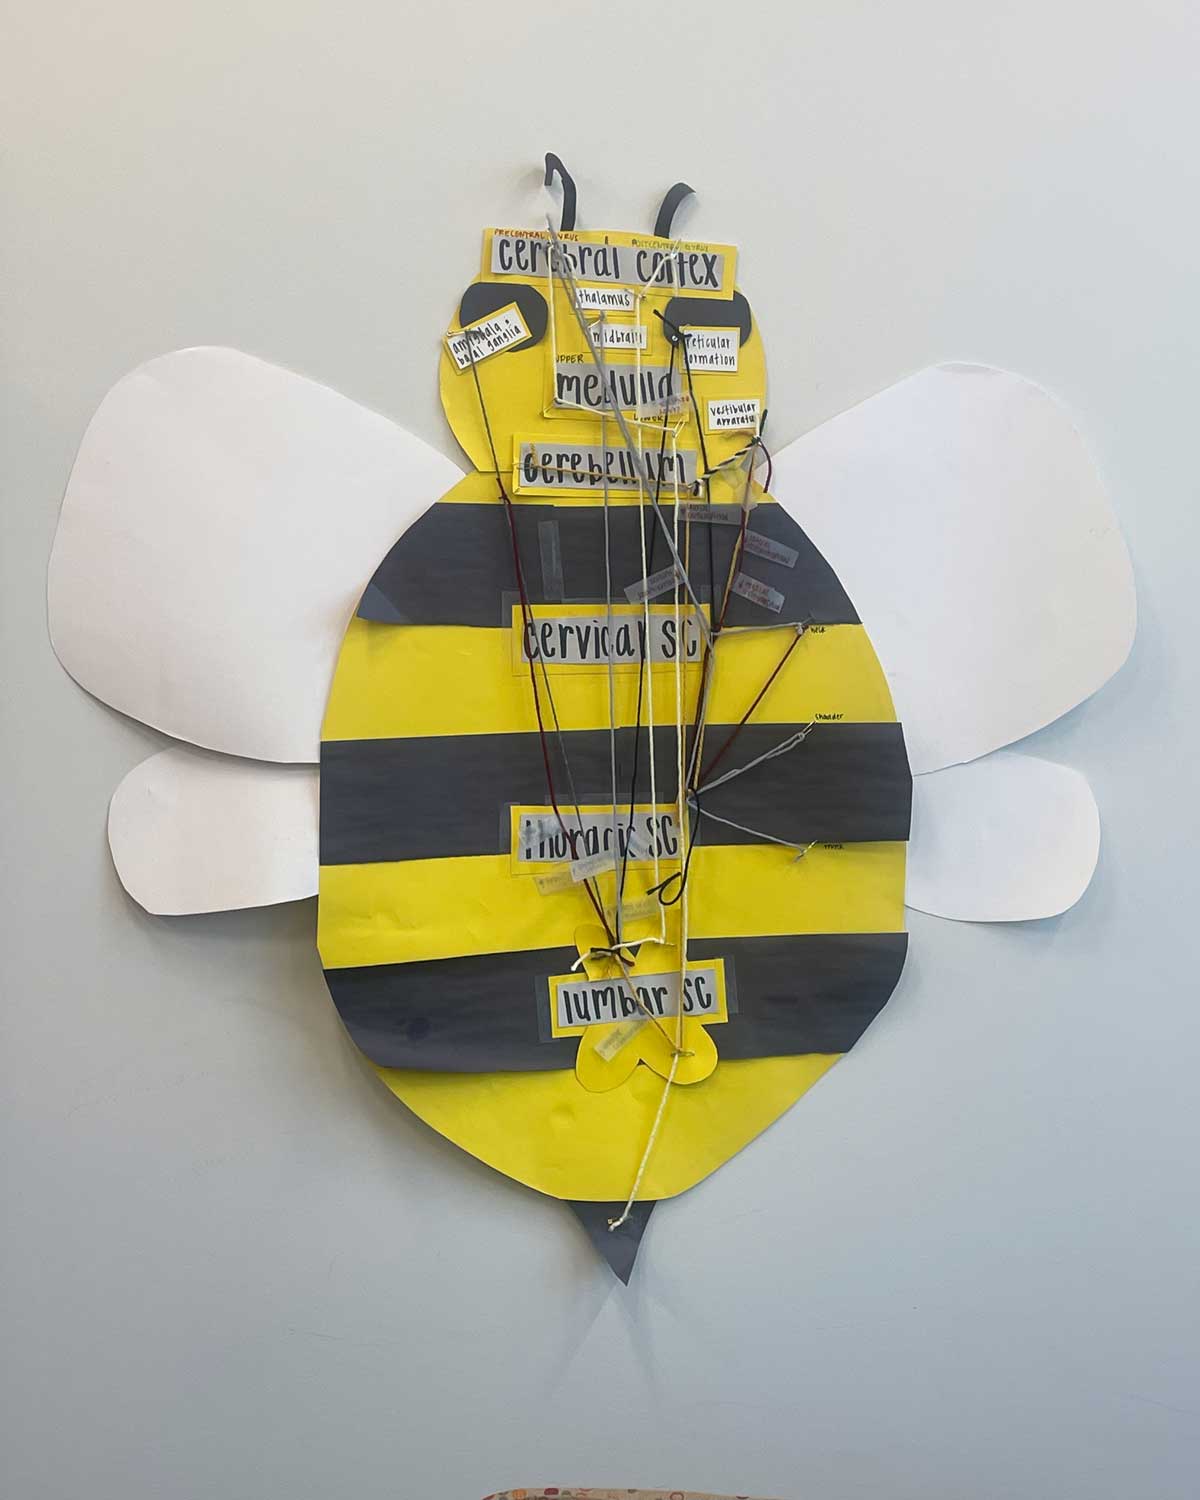 A wall decoration shaped like a bee and labeled with spinal components.